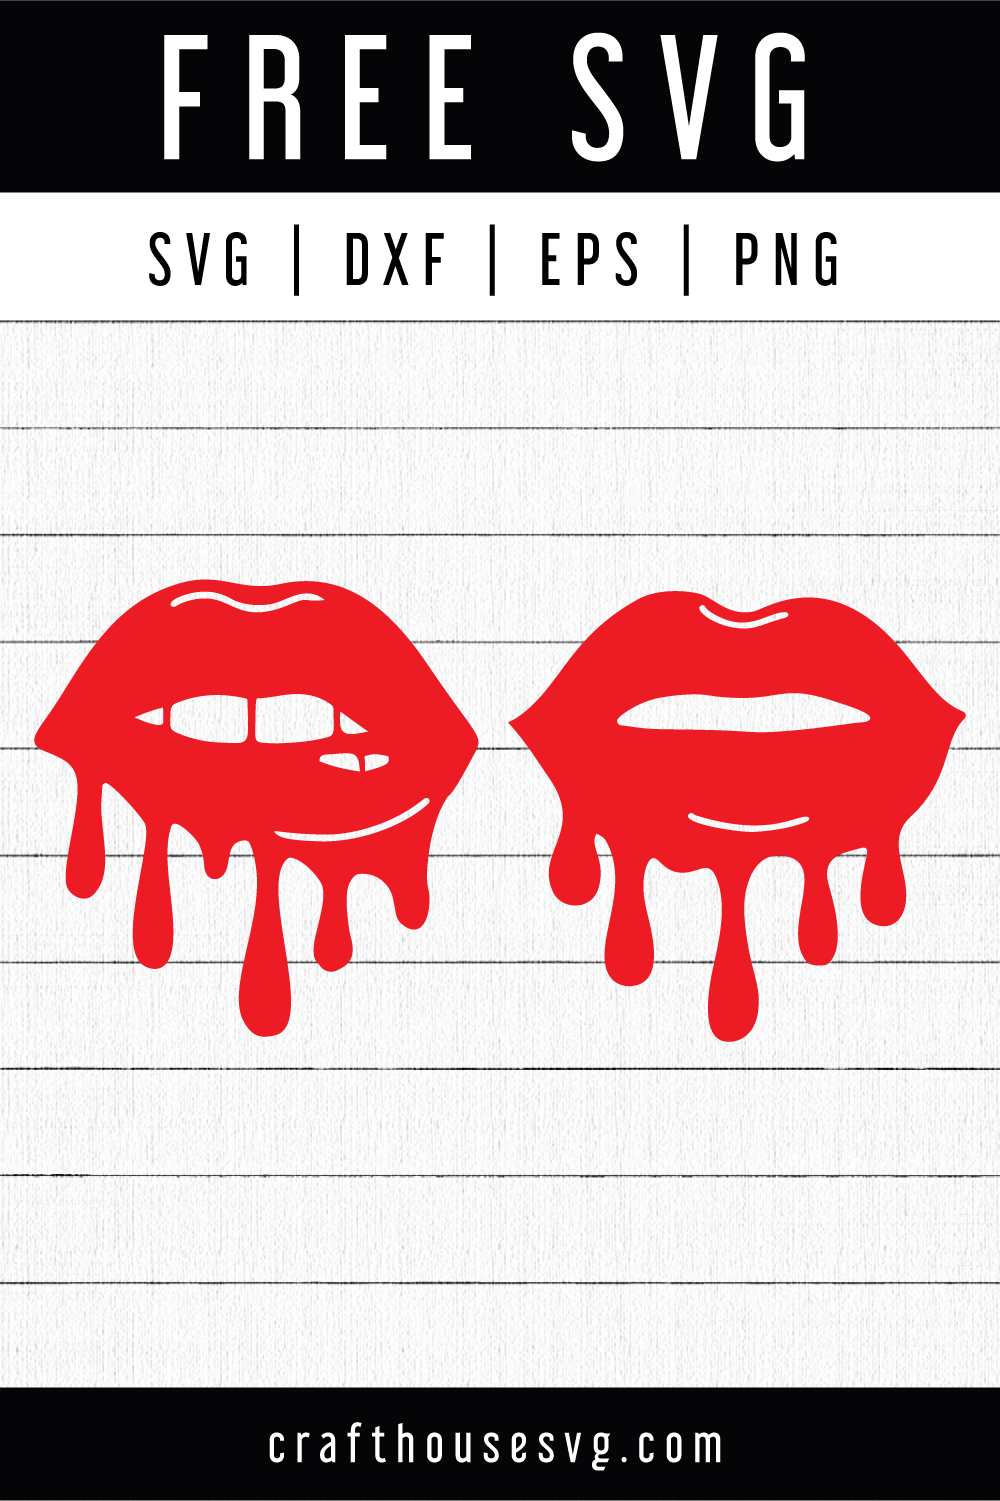 FREE Dripping lips SVG | FB133 Craft House SVG - SVG files for Cricut and Silhouette